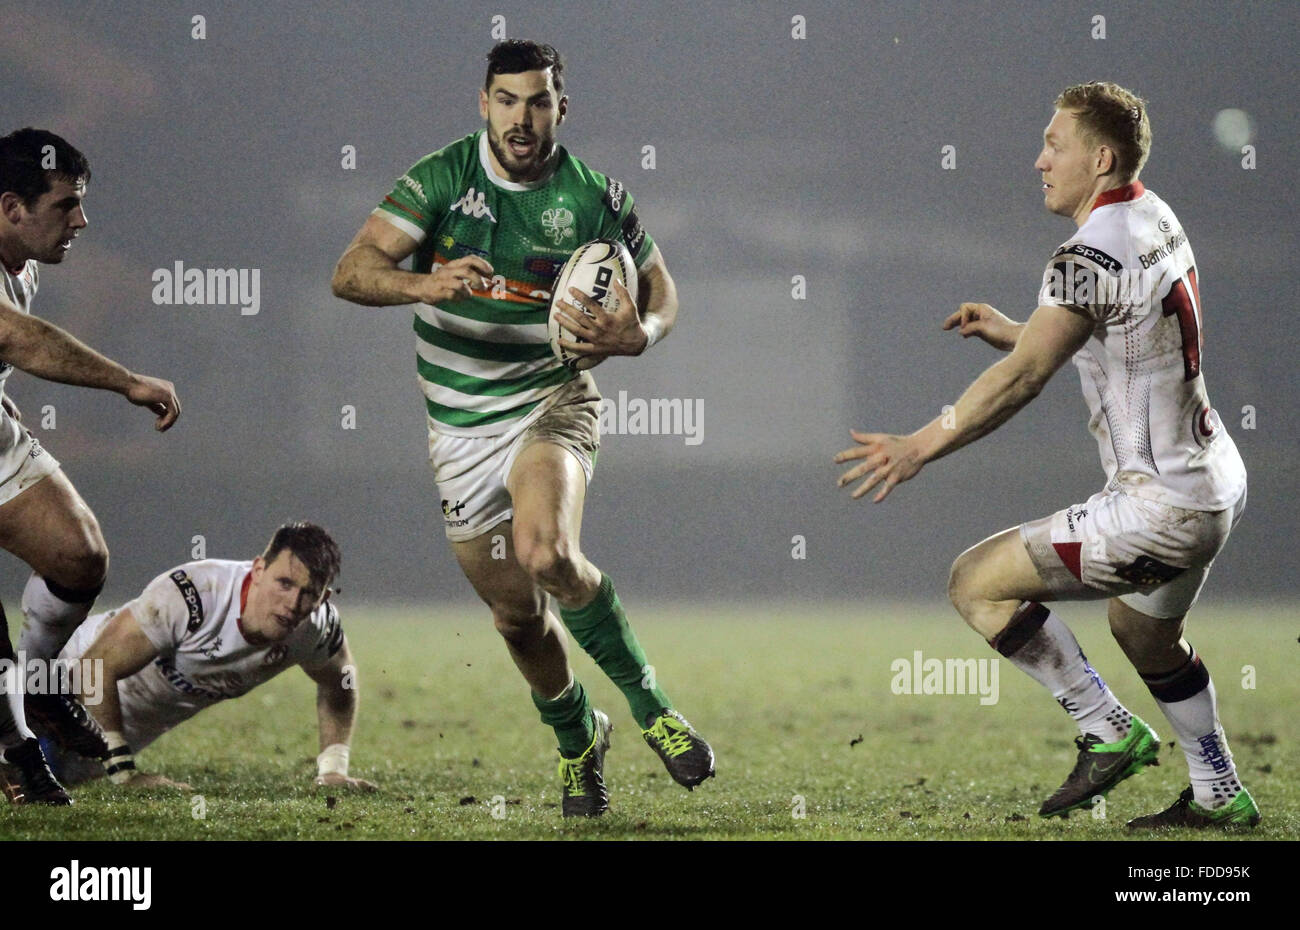 Treviso, Italy. 30th January, 2016. Treviso's player Jayden Hayward runs with the ball during Rugby Guinness Pro12 match  between Benetton Treviso and Ulster on 30th January, 2016. Credit:  Andrea Spinelli/Alamy Live News Stock Photo